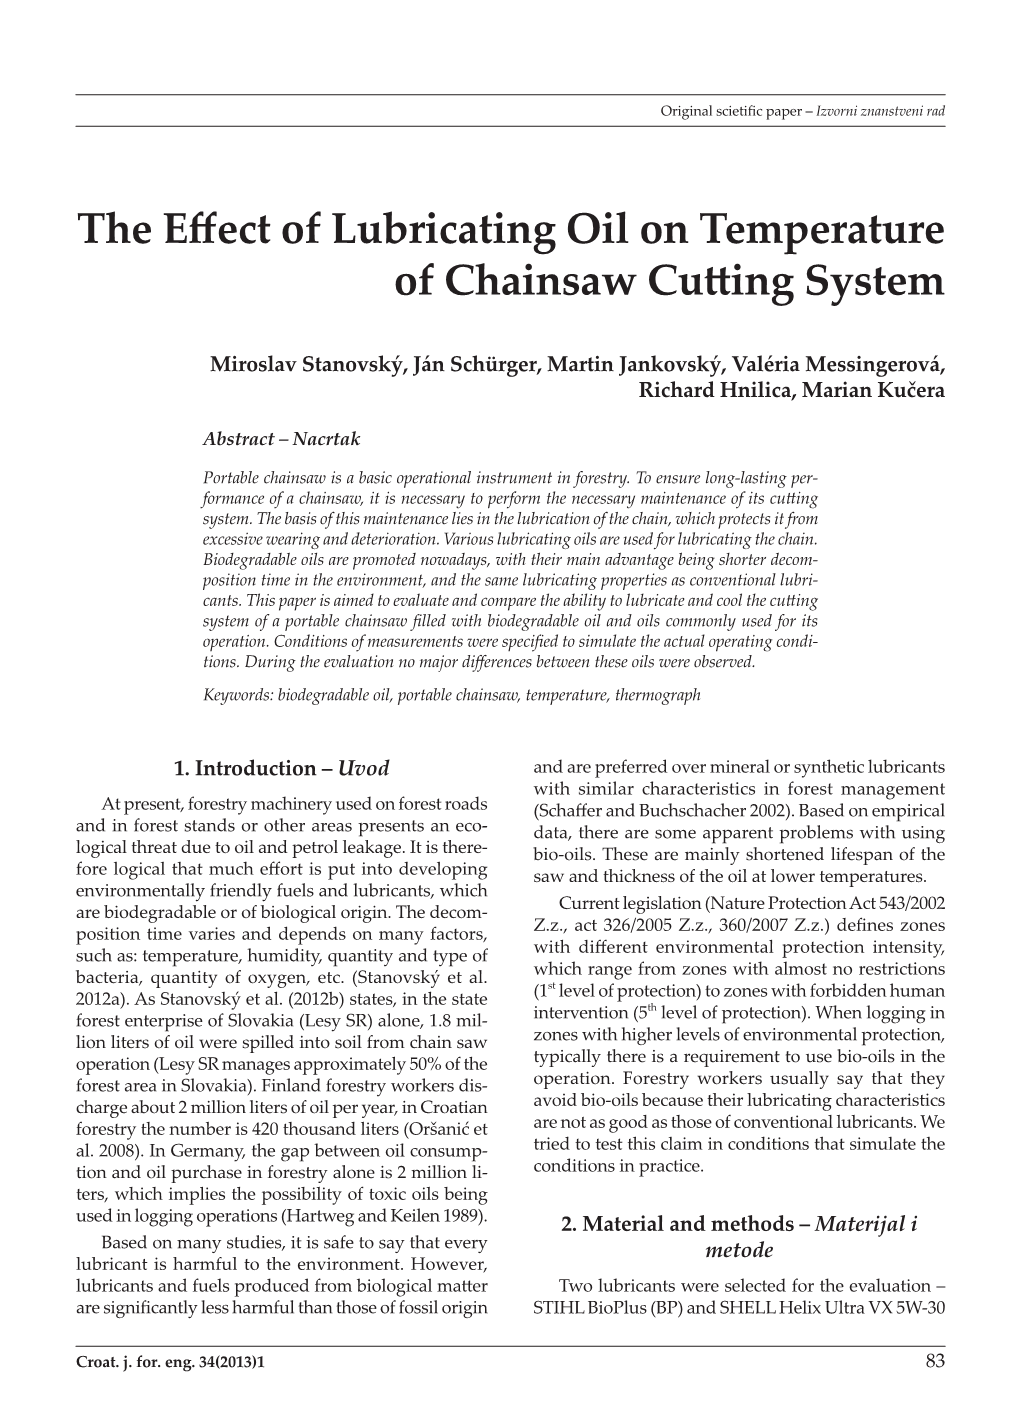 The Effect of Lubricating Oil on Temperature of Chainsaw Cutting System